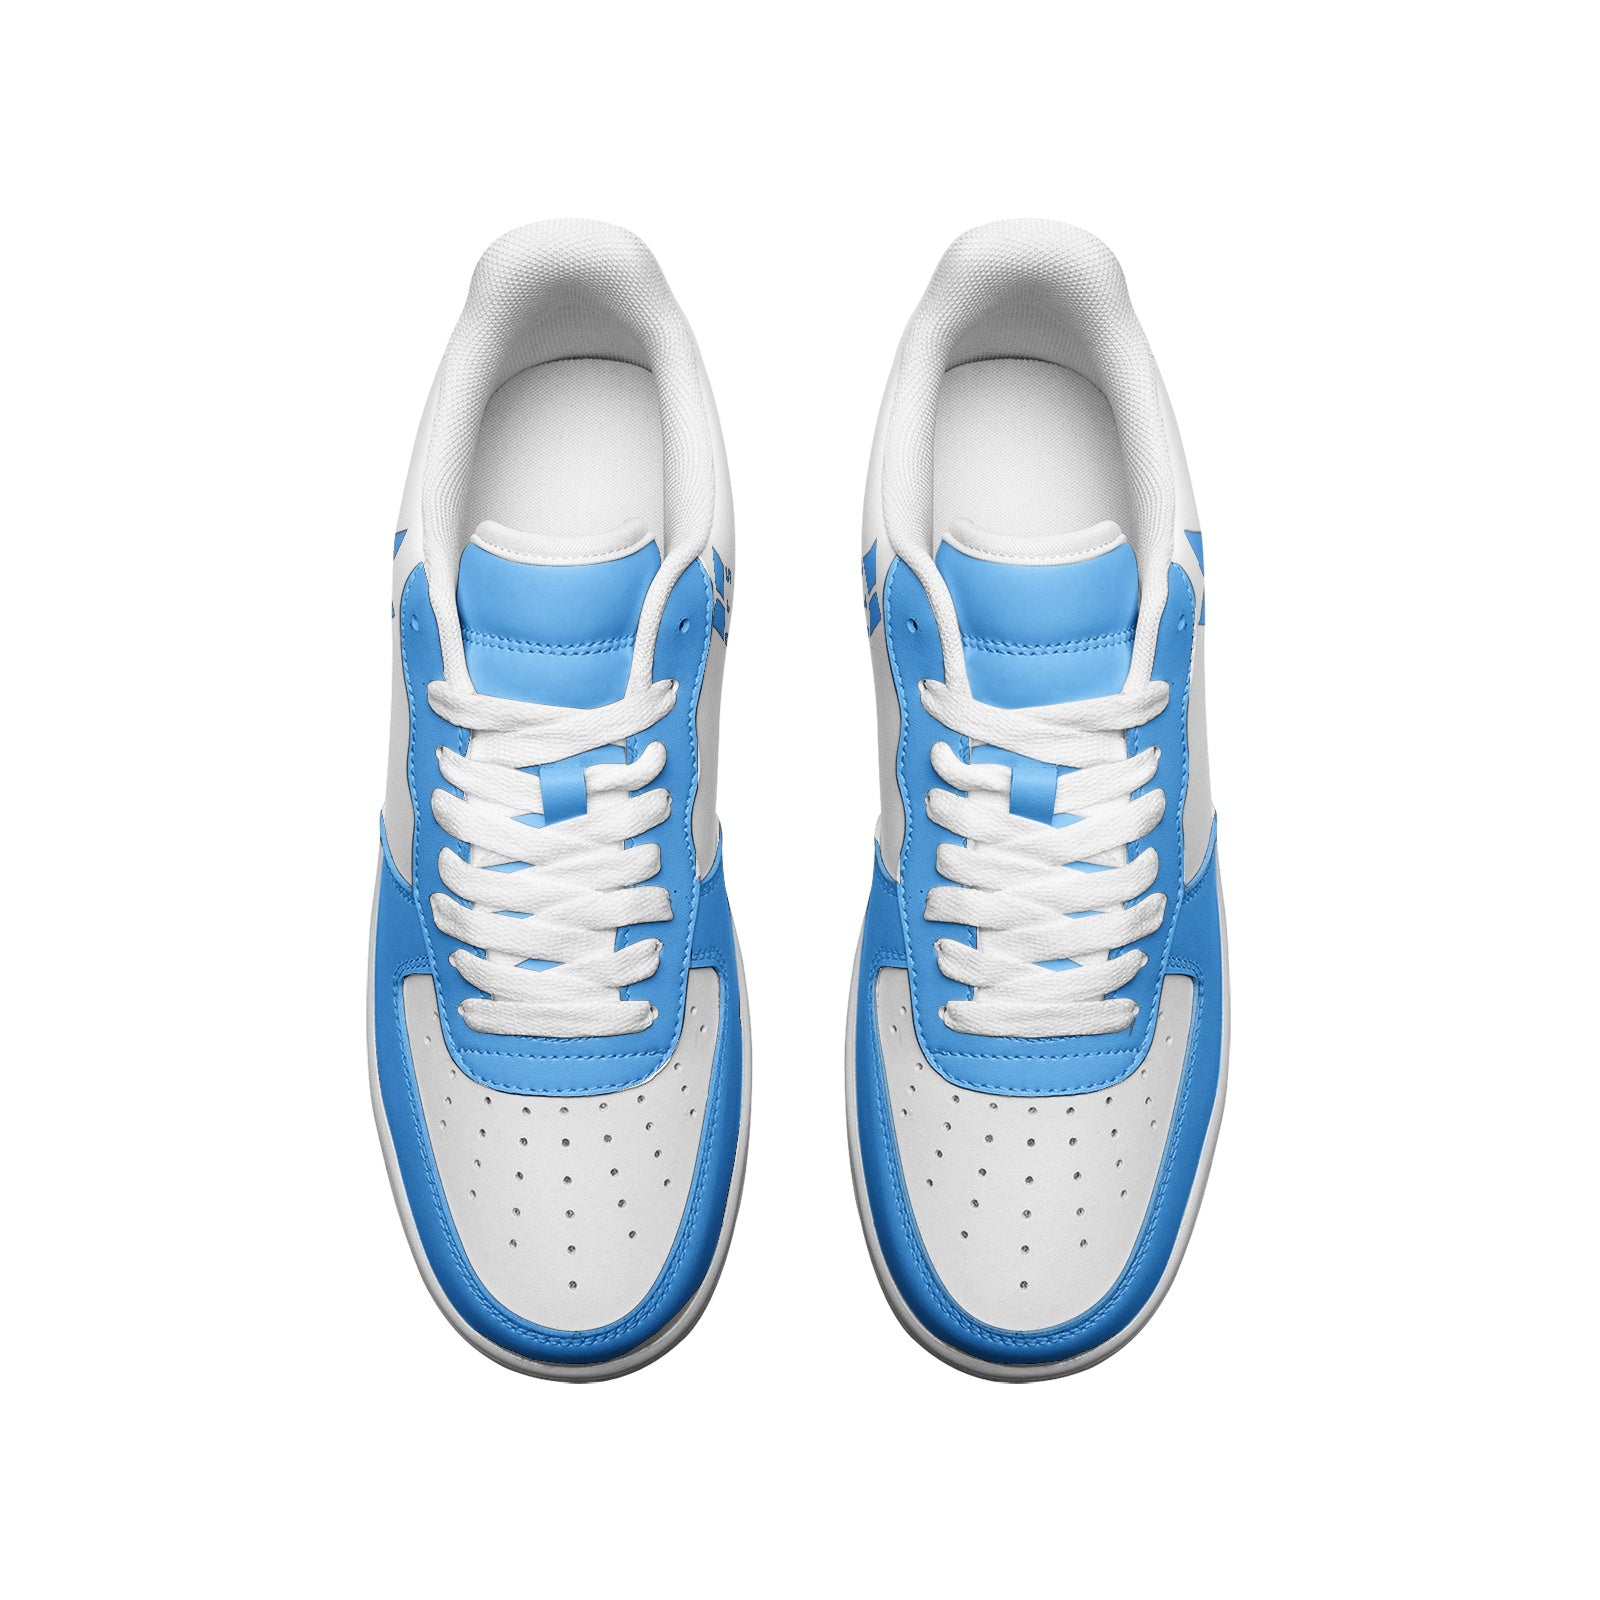 BTS Logo Unisex Low Top Leather Sneakers Light Blue - SD-style-shop